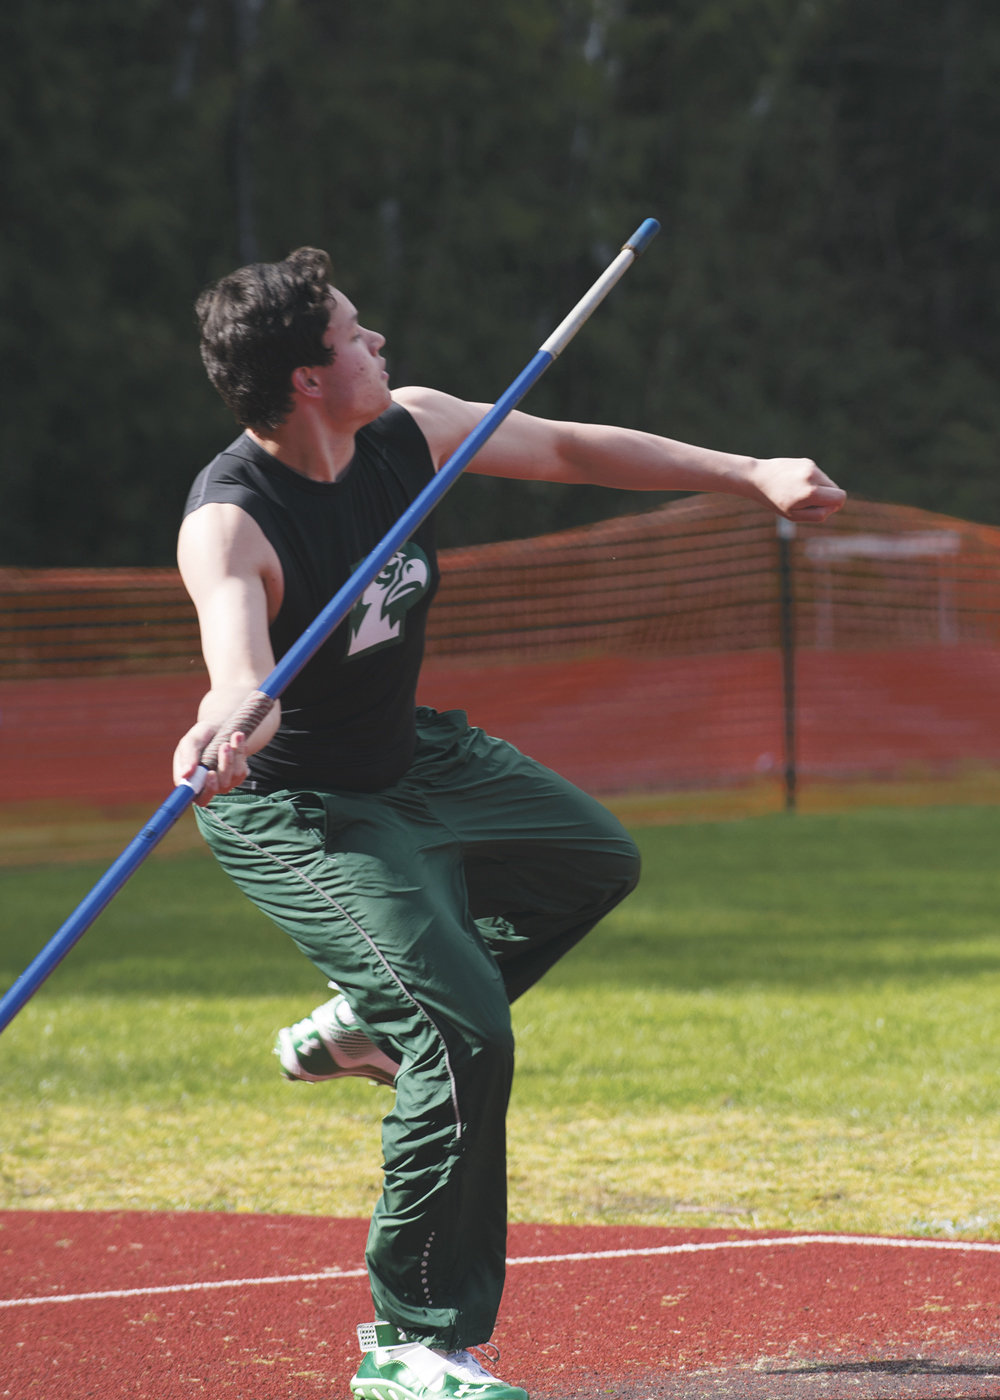 Peninsula High School freshman and KP resident Mason Hyde, 15, throws the javelin 130 feet 1 inch, for a personal best and second place during the track meet at Gig Harbor High April 6. Hyde ranks No. 10 in the South Sound league. Photo: Ed Johnson, KP News